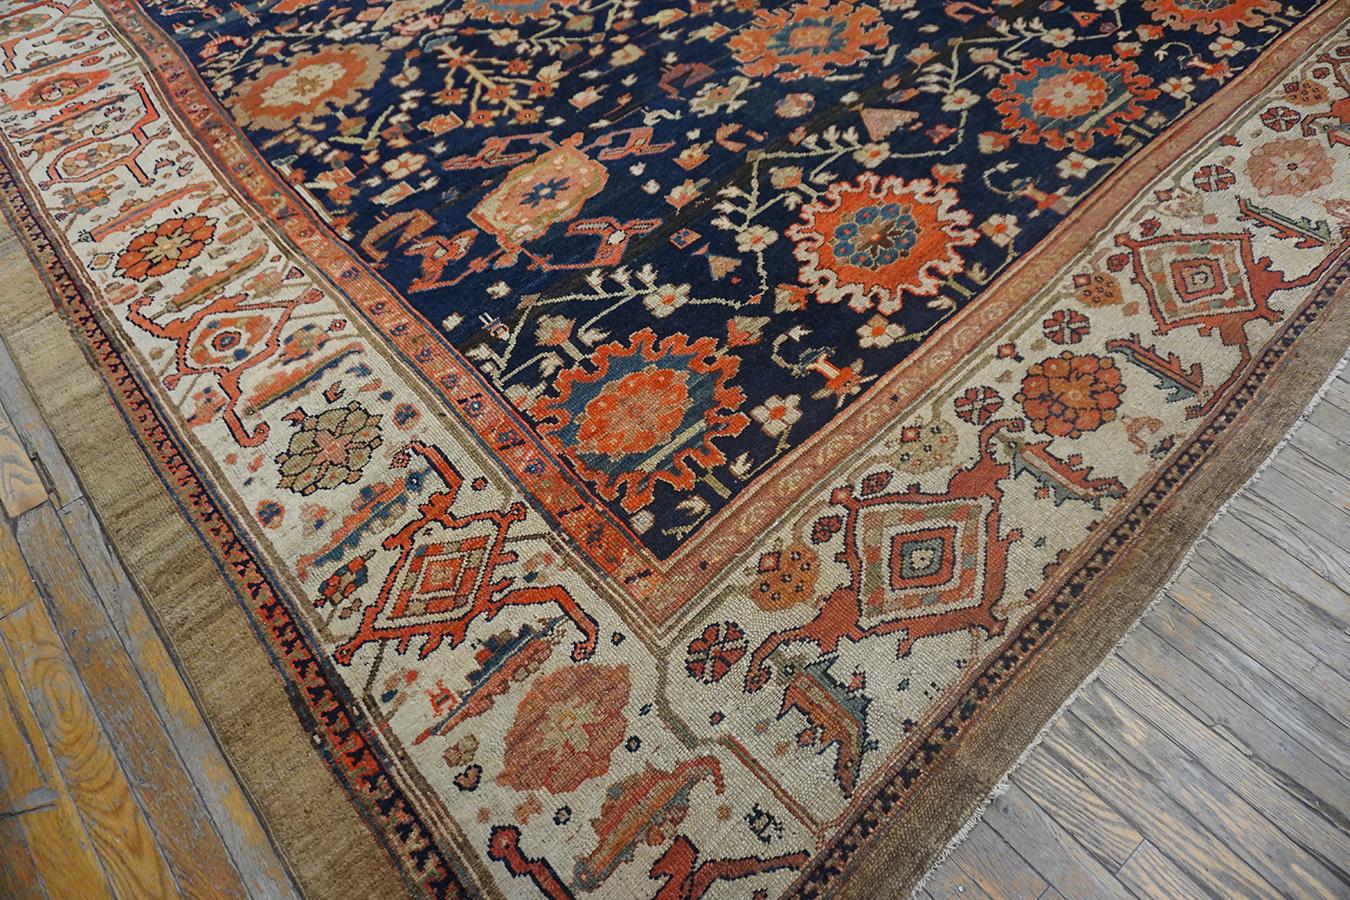 Hand-Knotted 19th Century Persian Bibikabad Carpet with Harshang Pattern ( 10'7